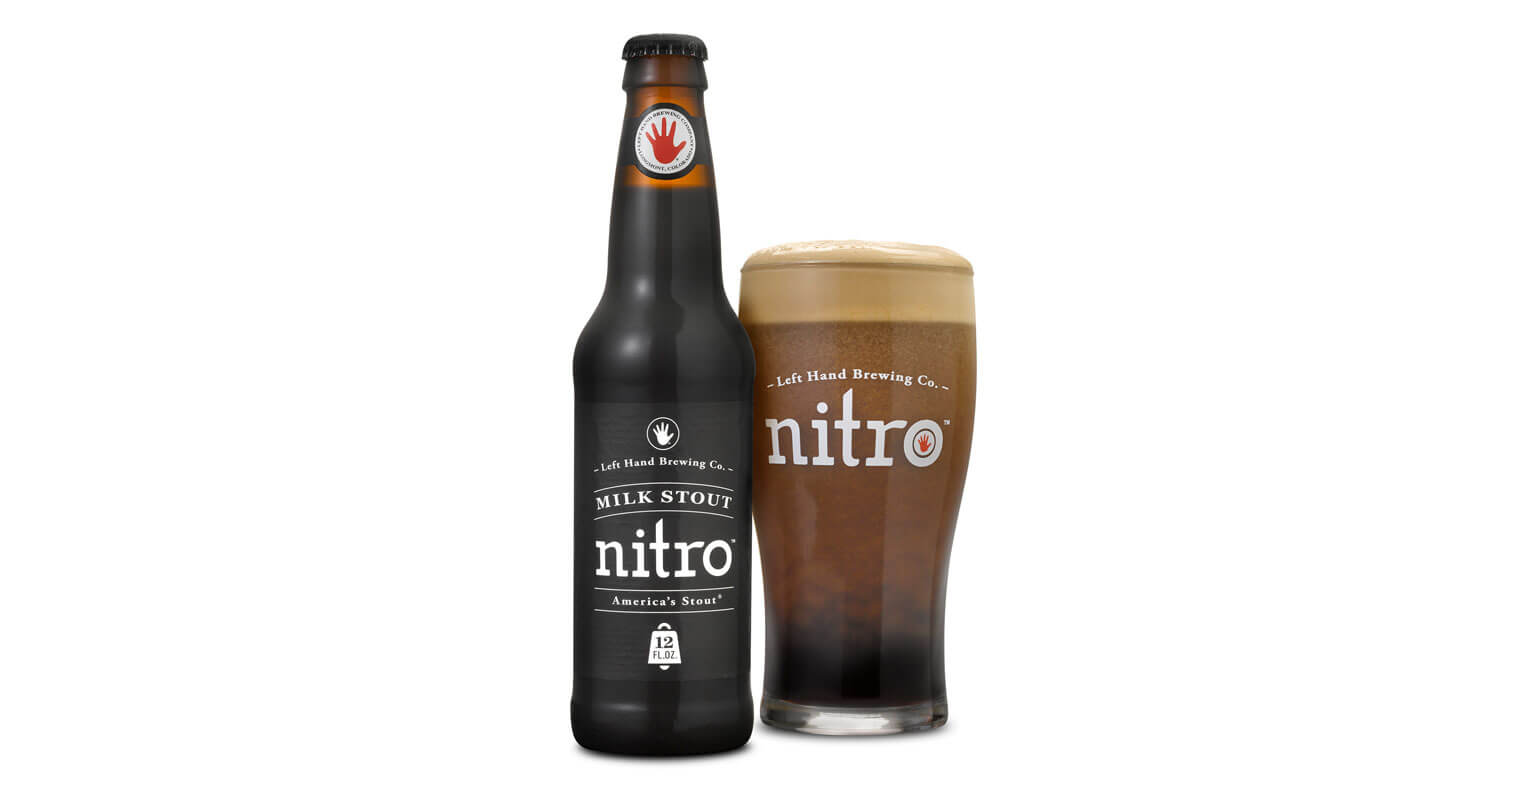 Toast St. Patrick's Day with Milk Stout Nitro, featured image